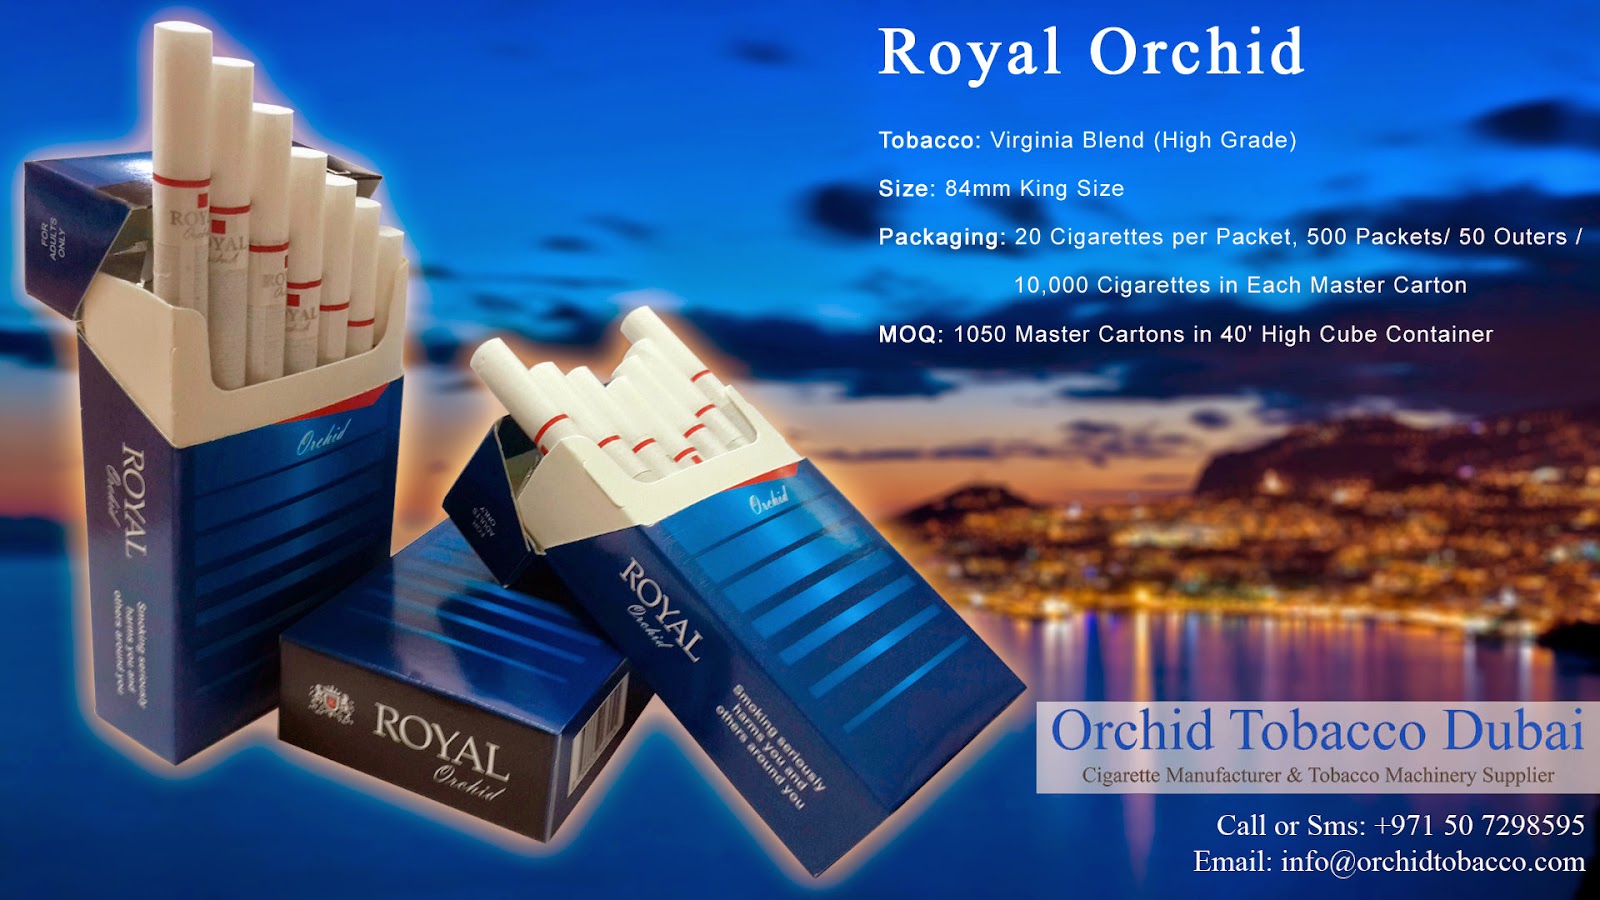 Orchid Tobacco is a Cigarette Manufacturing Company. Orchid Tobacco Dubai Manufactures 84mm-Cigarettes, 100mm-Cigarettes, Slims-Cigarettes, Super-Slims-Cigarettes, Nano-Cigarettes, Soft-Pack-Cigarettes, King-Size-Filtered-Cigarettes, Flavored-Cigarettes, Virginia-Cigarettes. Orchid Tobacco Dubai exports these tobacco-products to Ukraine, Russia, Bulgaria, Poland, Holland, Germany, Canada, U.S.A., U.K., South Africa, North America, South America, Armenia, Romania, Turkey Regions.